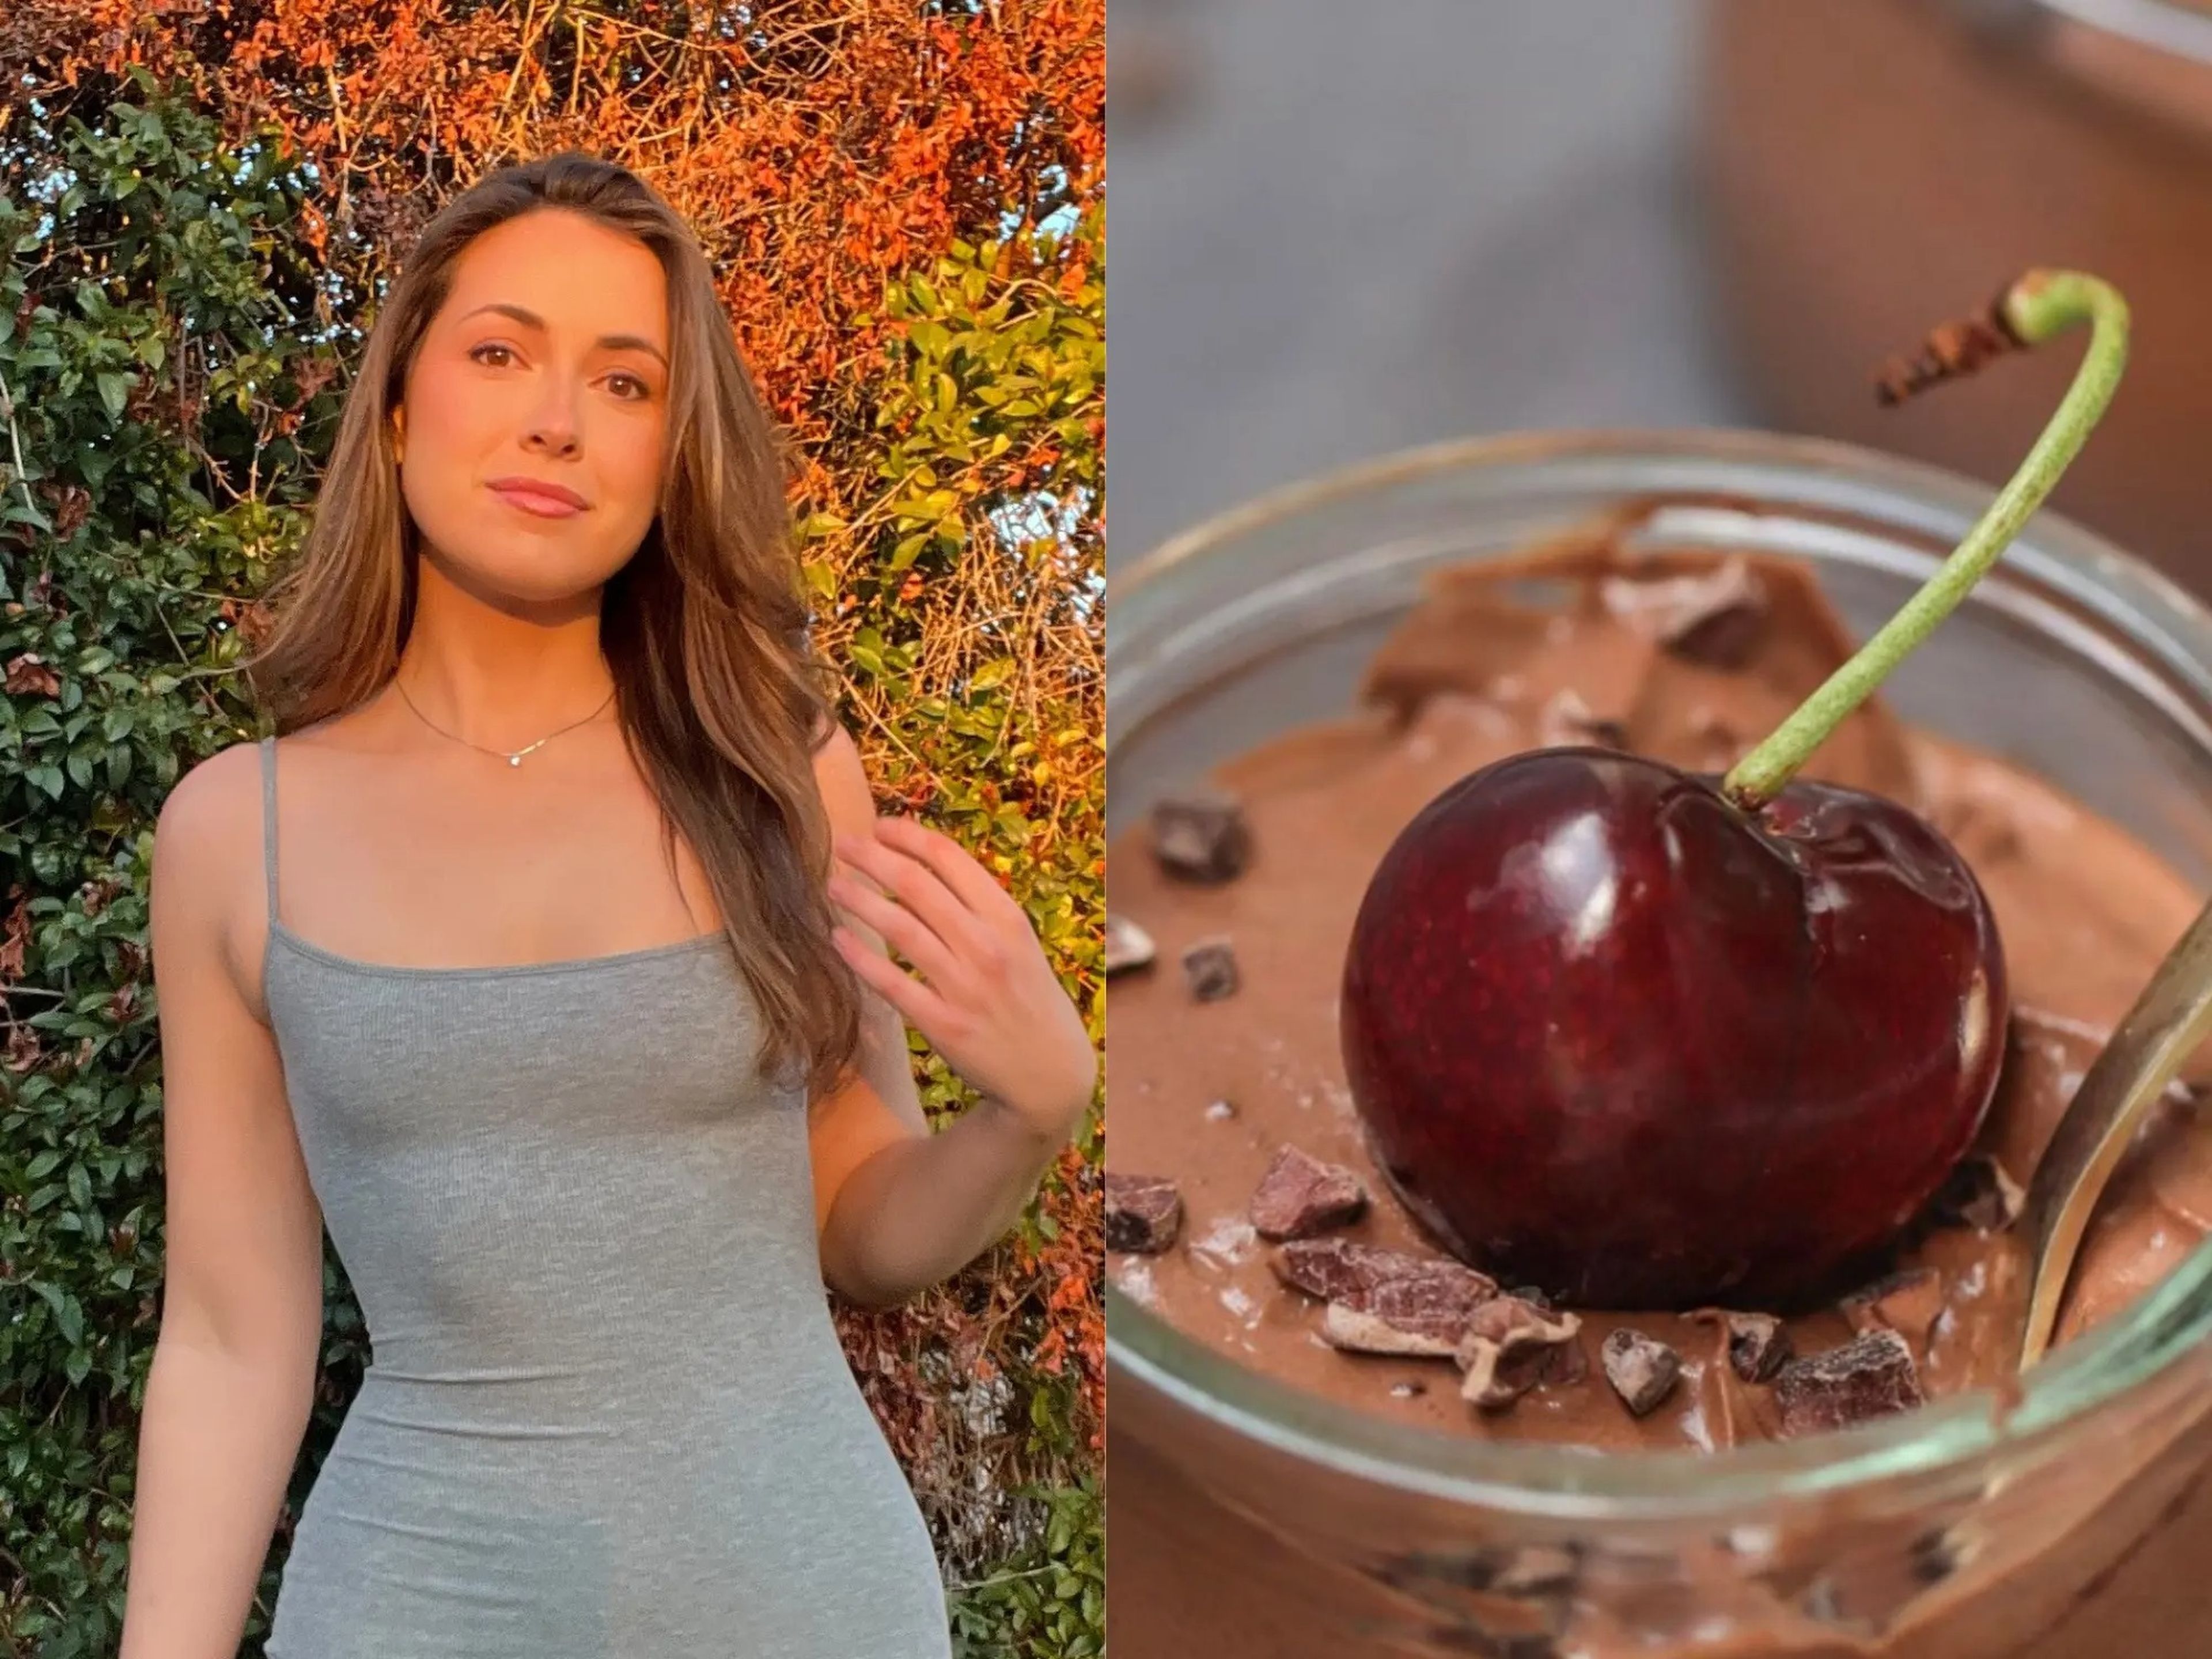 A composite image of a woman in a gray dress and a pot of chocolate mousse with a cherry on top.